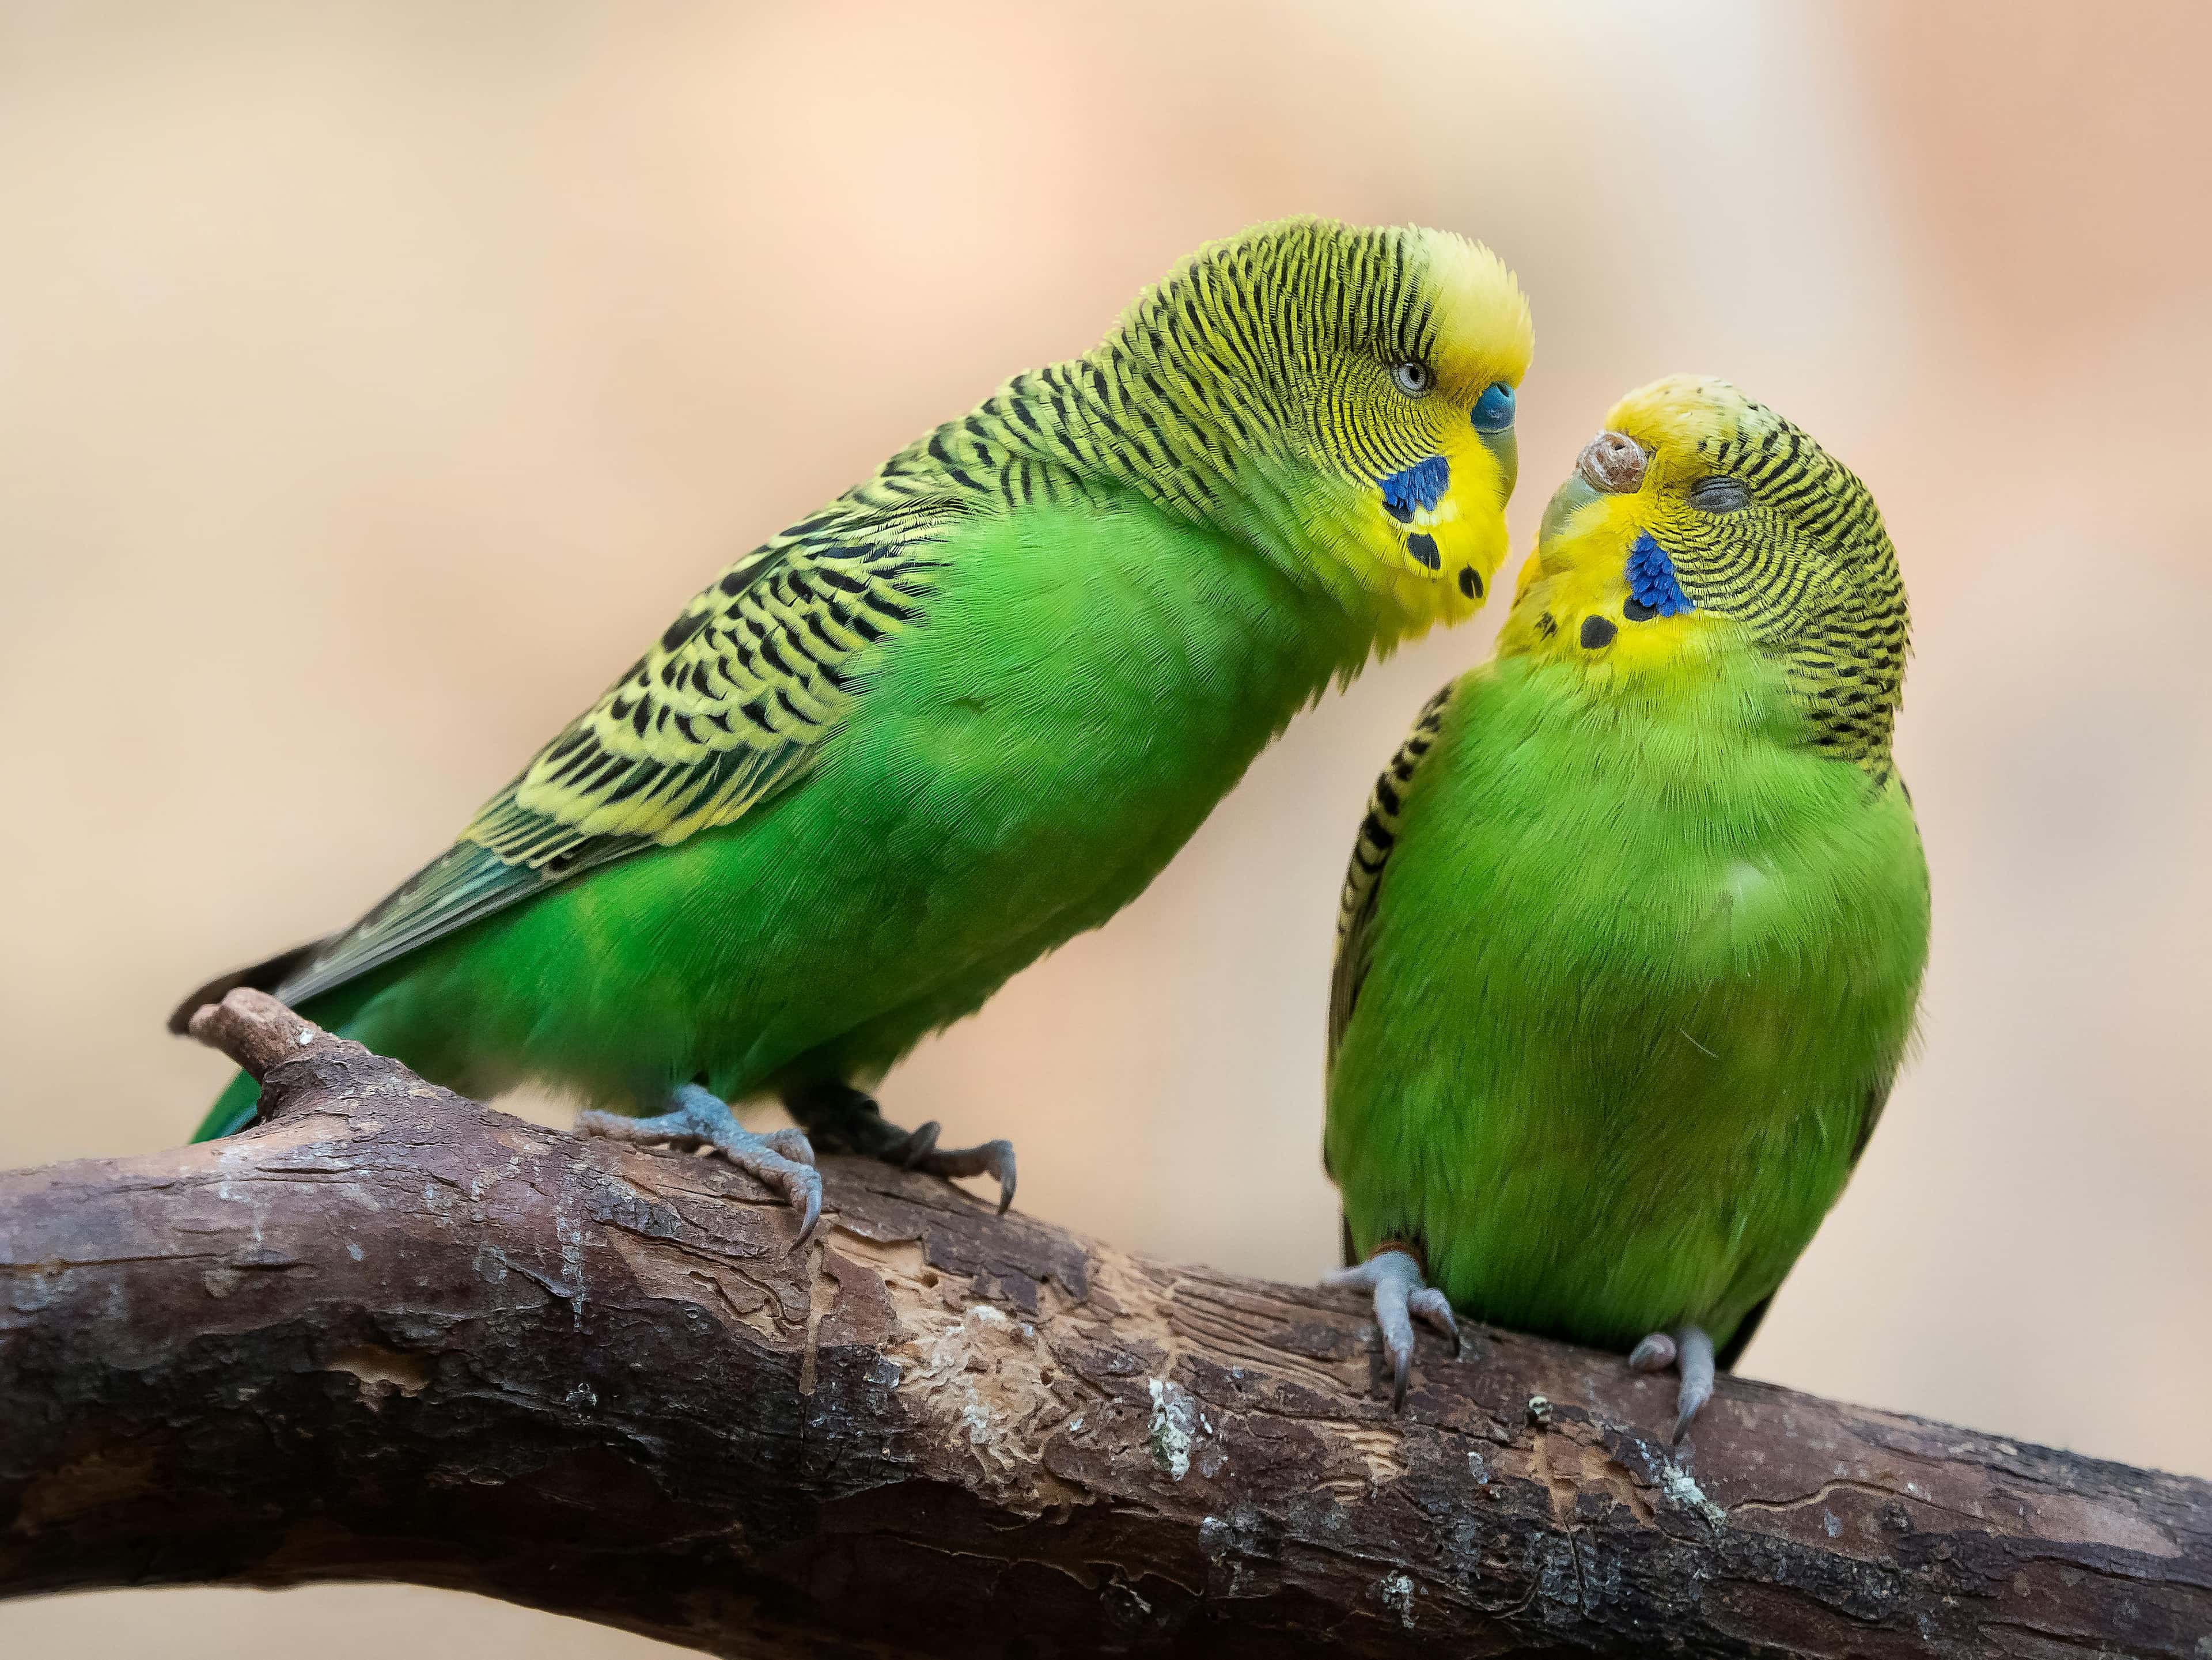 Two green budgerigars facing each other on a branch and appearing to communicate.